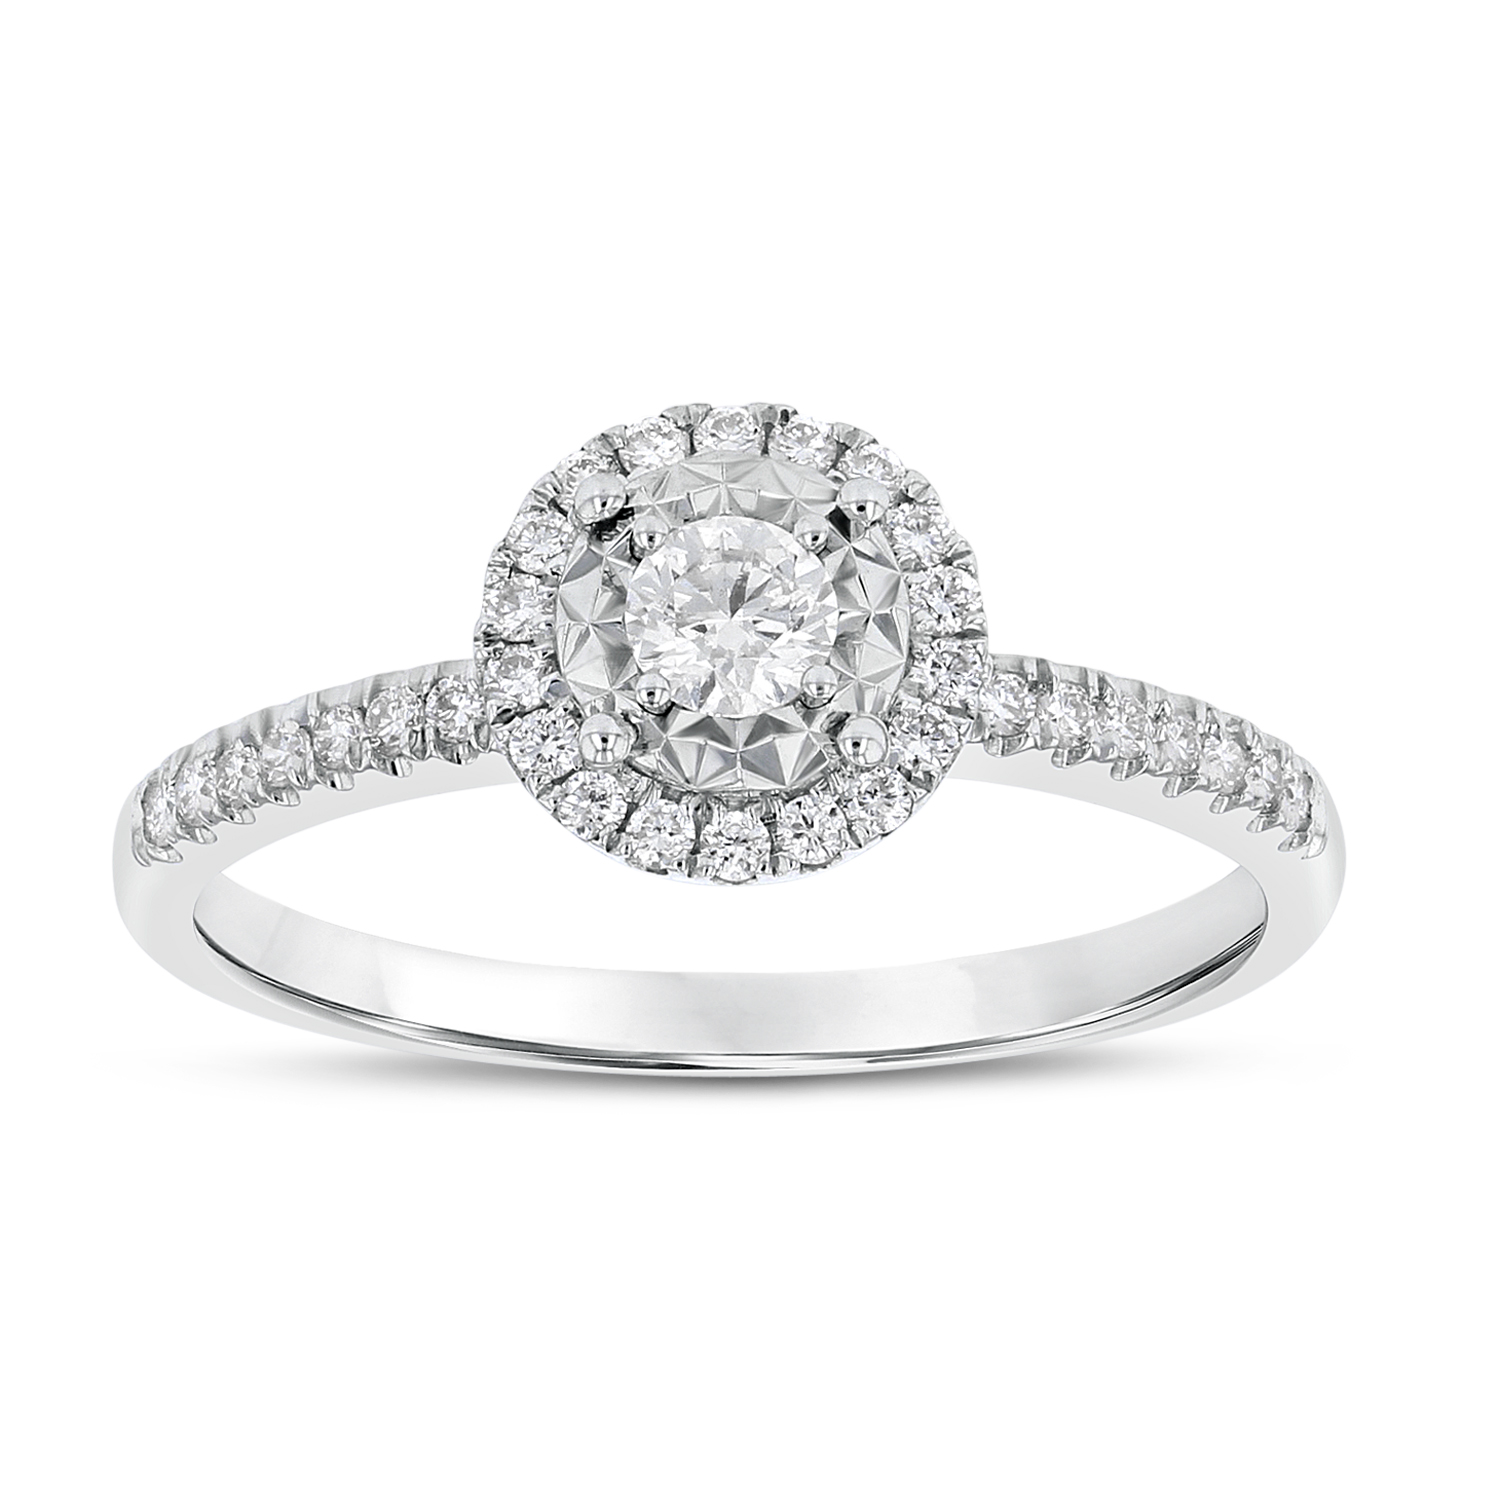 View 0.39ctw Diamond Halo Ring in 18k White Gold